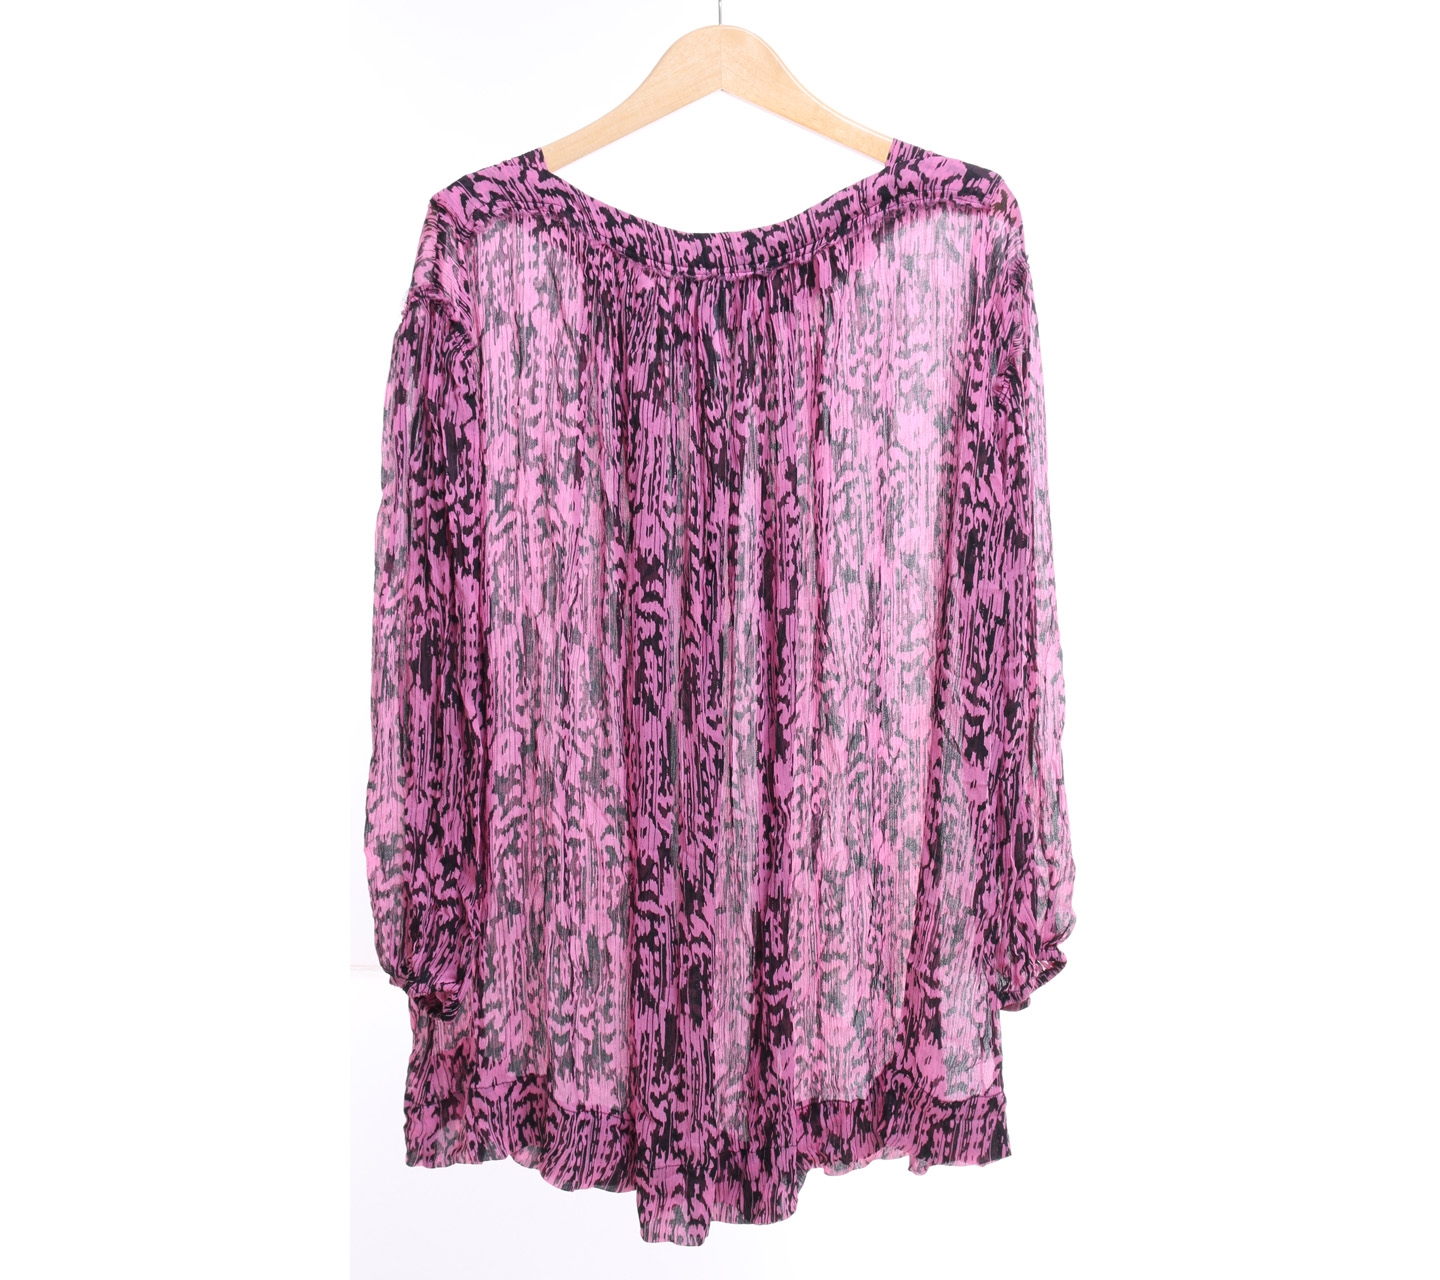 Isabel Marant Pink And Black Tunic Blouse